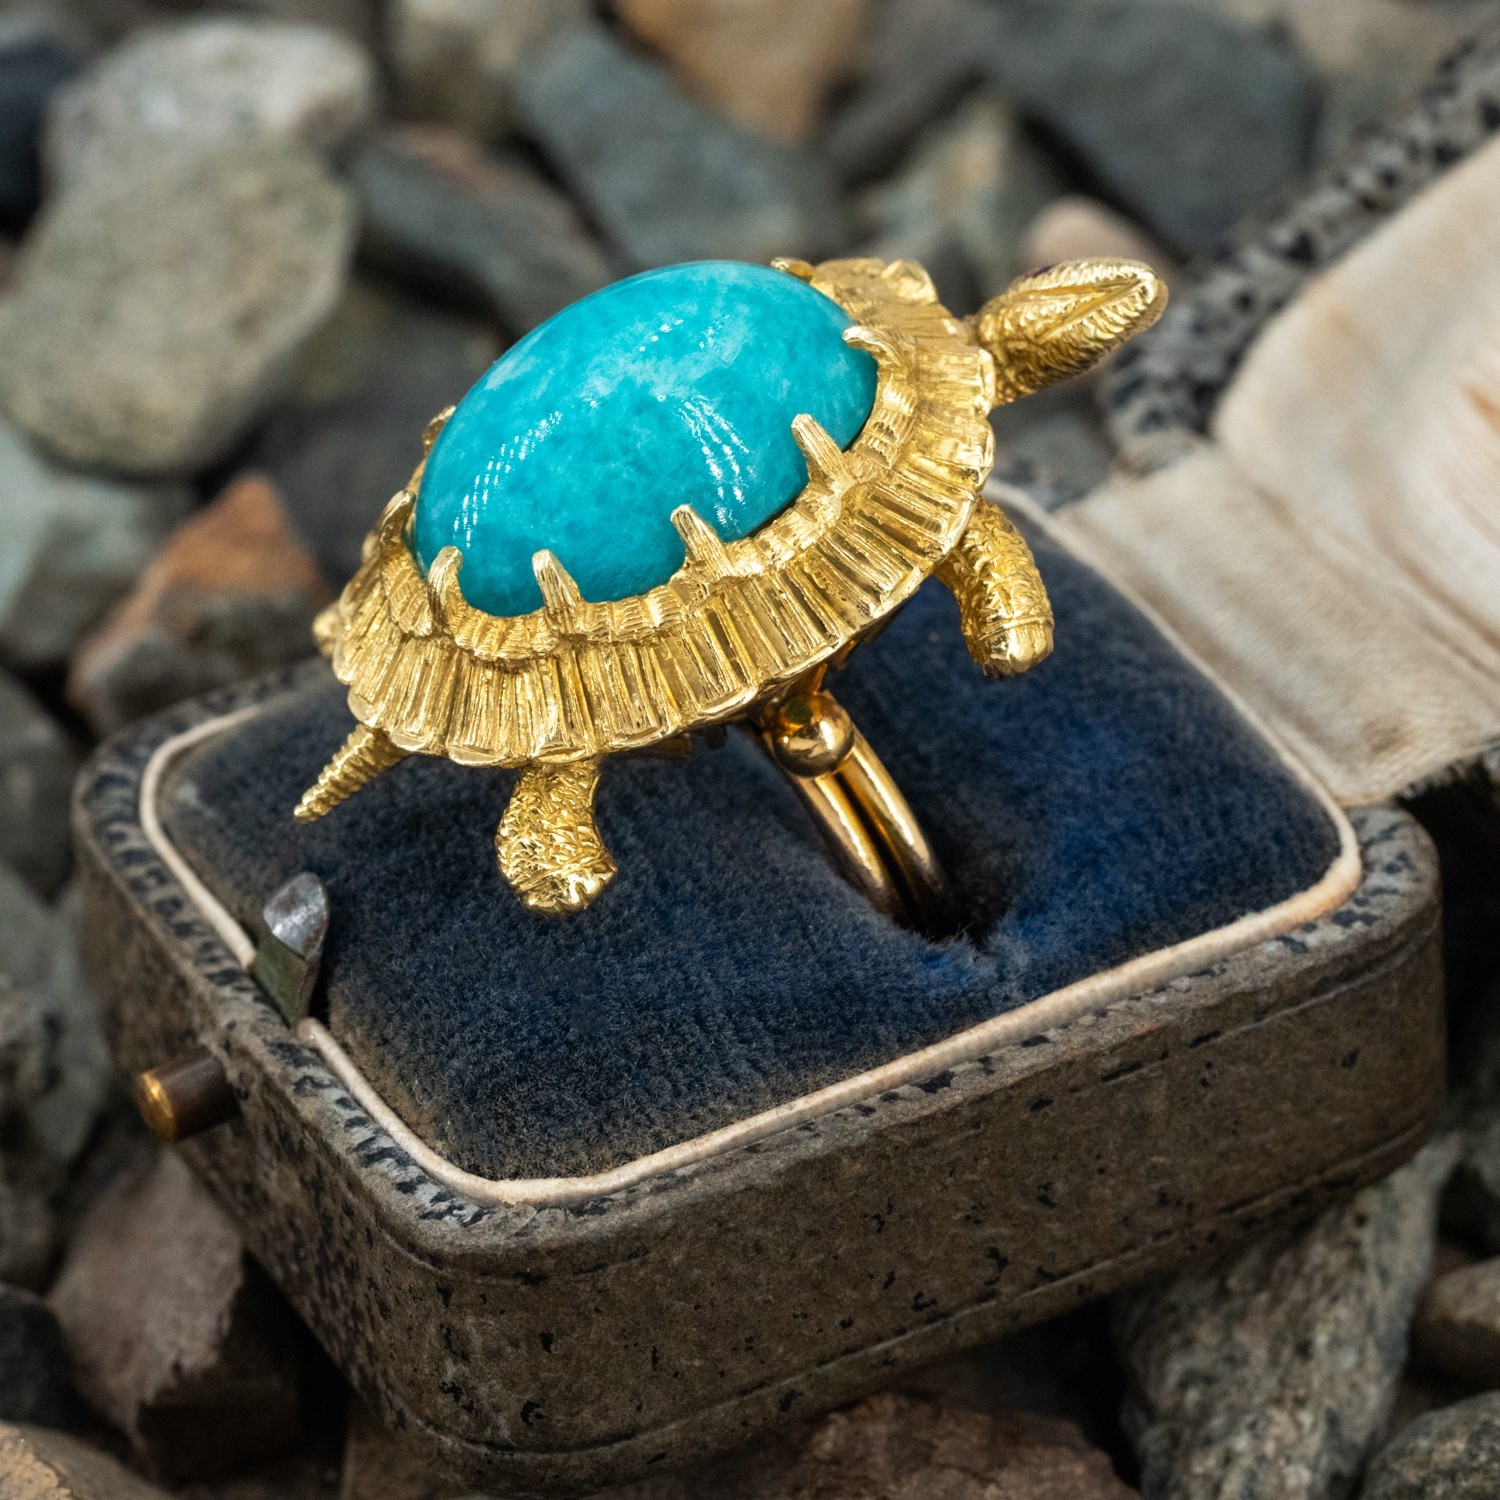 Sea Turtle Ring 051 Turtle Ring, Sea Turtle Jewelry, Animal Ring, Ocean Ring,  Sea Creature Ring, Green Peridot, Silver or Gold - Etsy | Turtle jewelry,  Sea turtle jewelry, Turtle ring